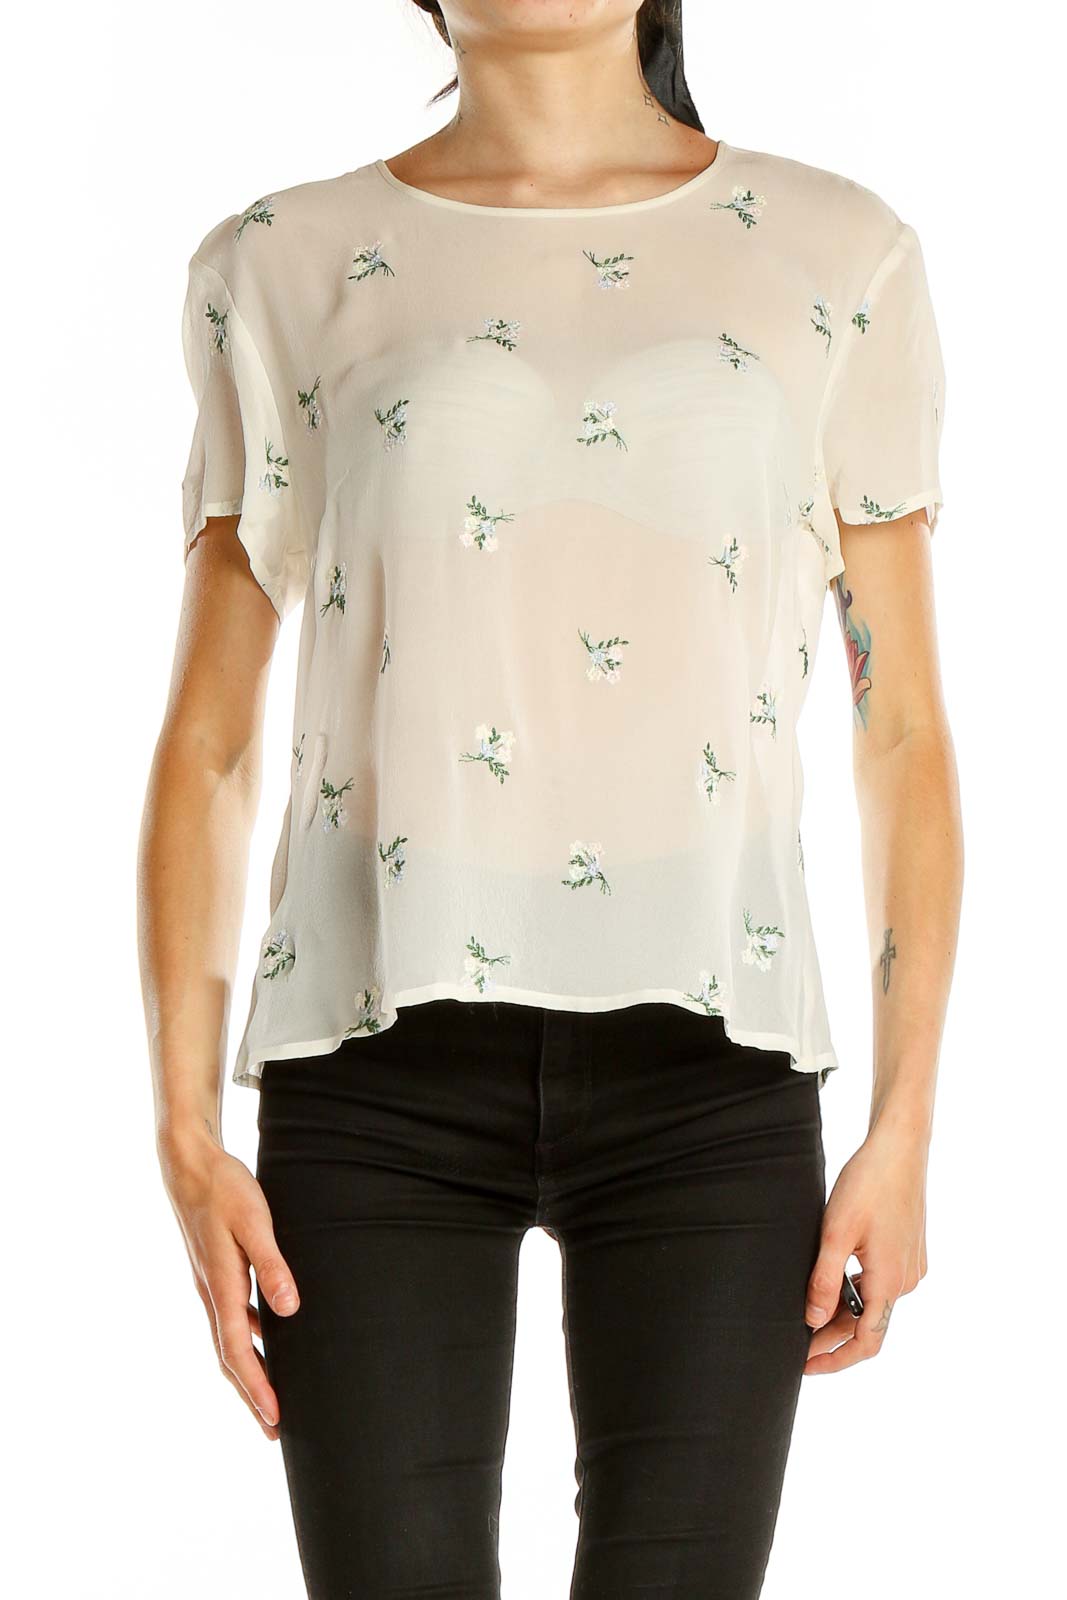 White Floral Embroidered Semi-Sheer Blouse Front